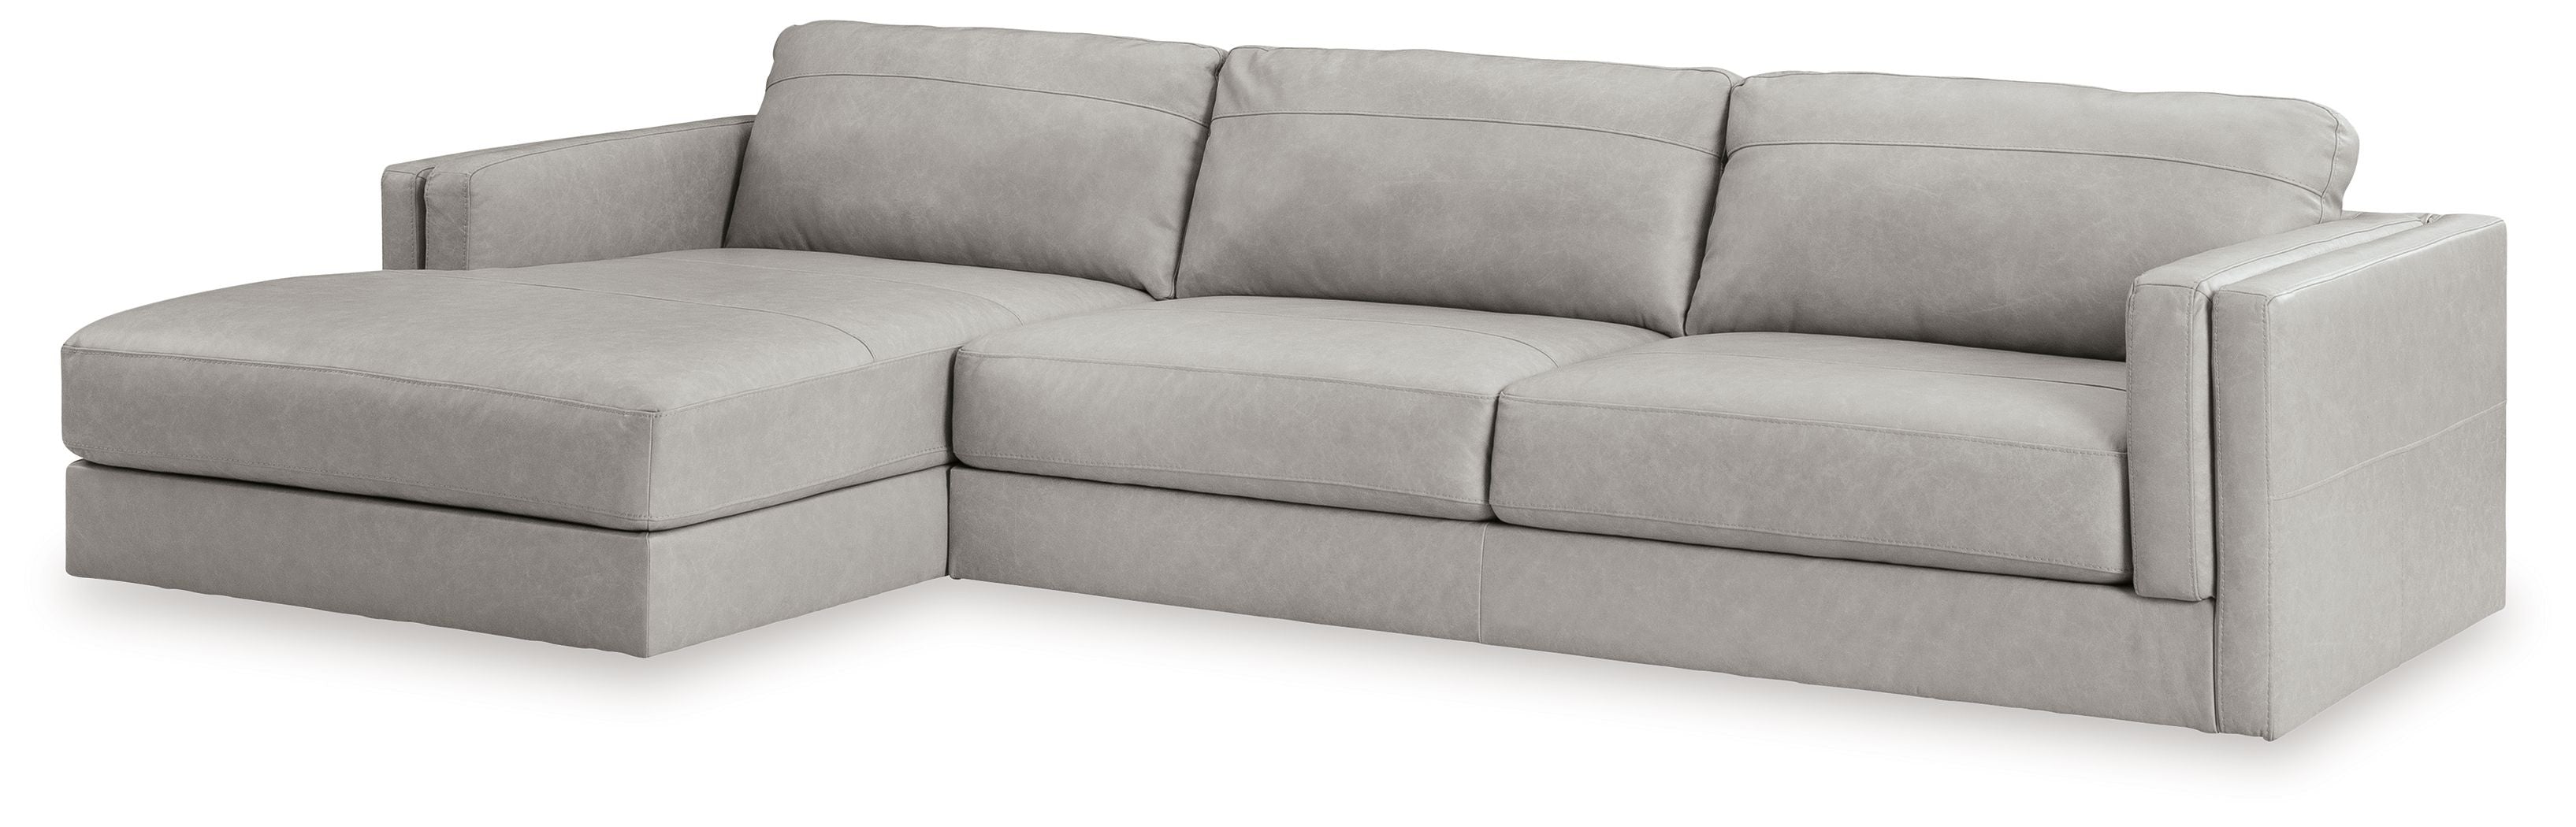 Signature Design by Ashley Amiata Gray Sectional - Modern & Cozy, Plush Cushions-Stationary Sectionals-American Furniture Outlet